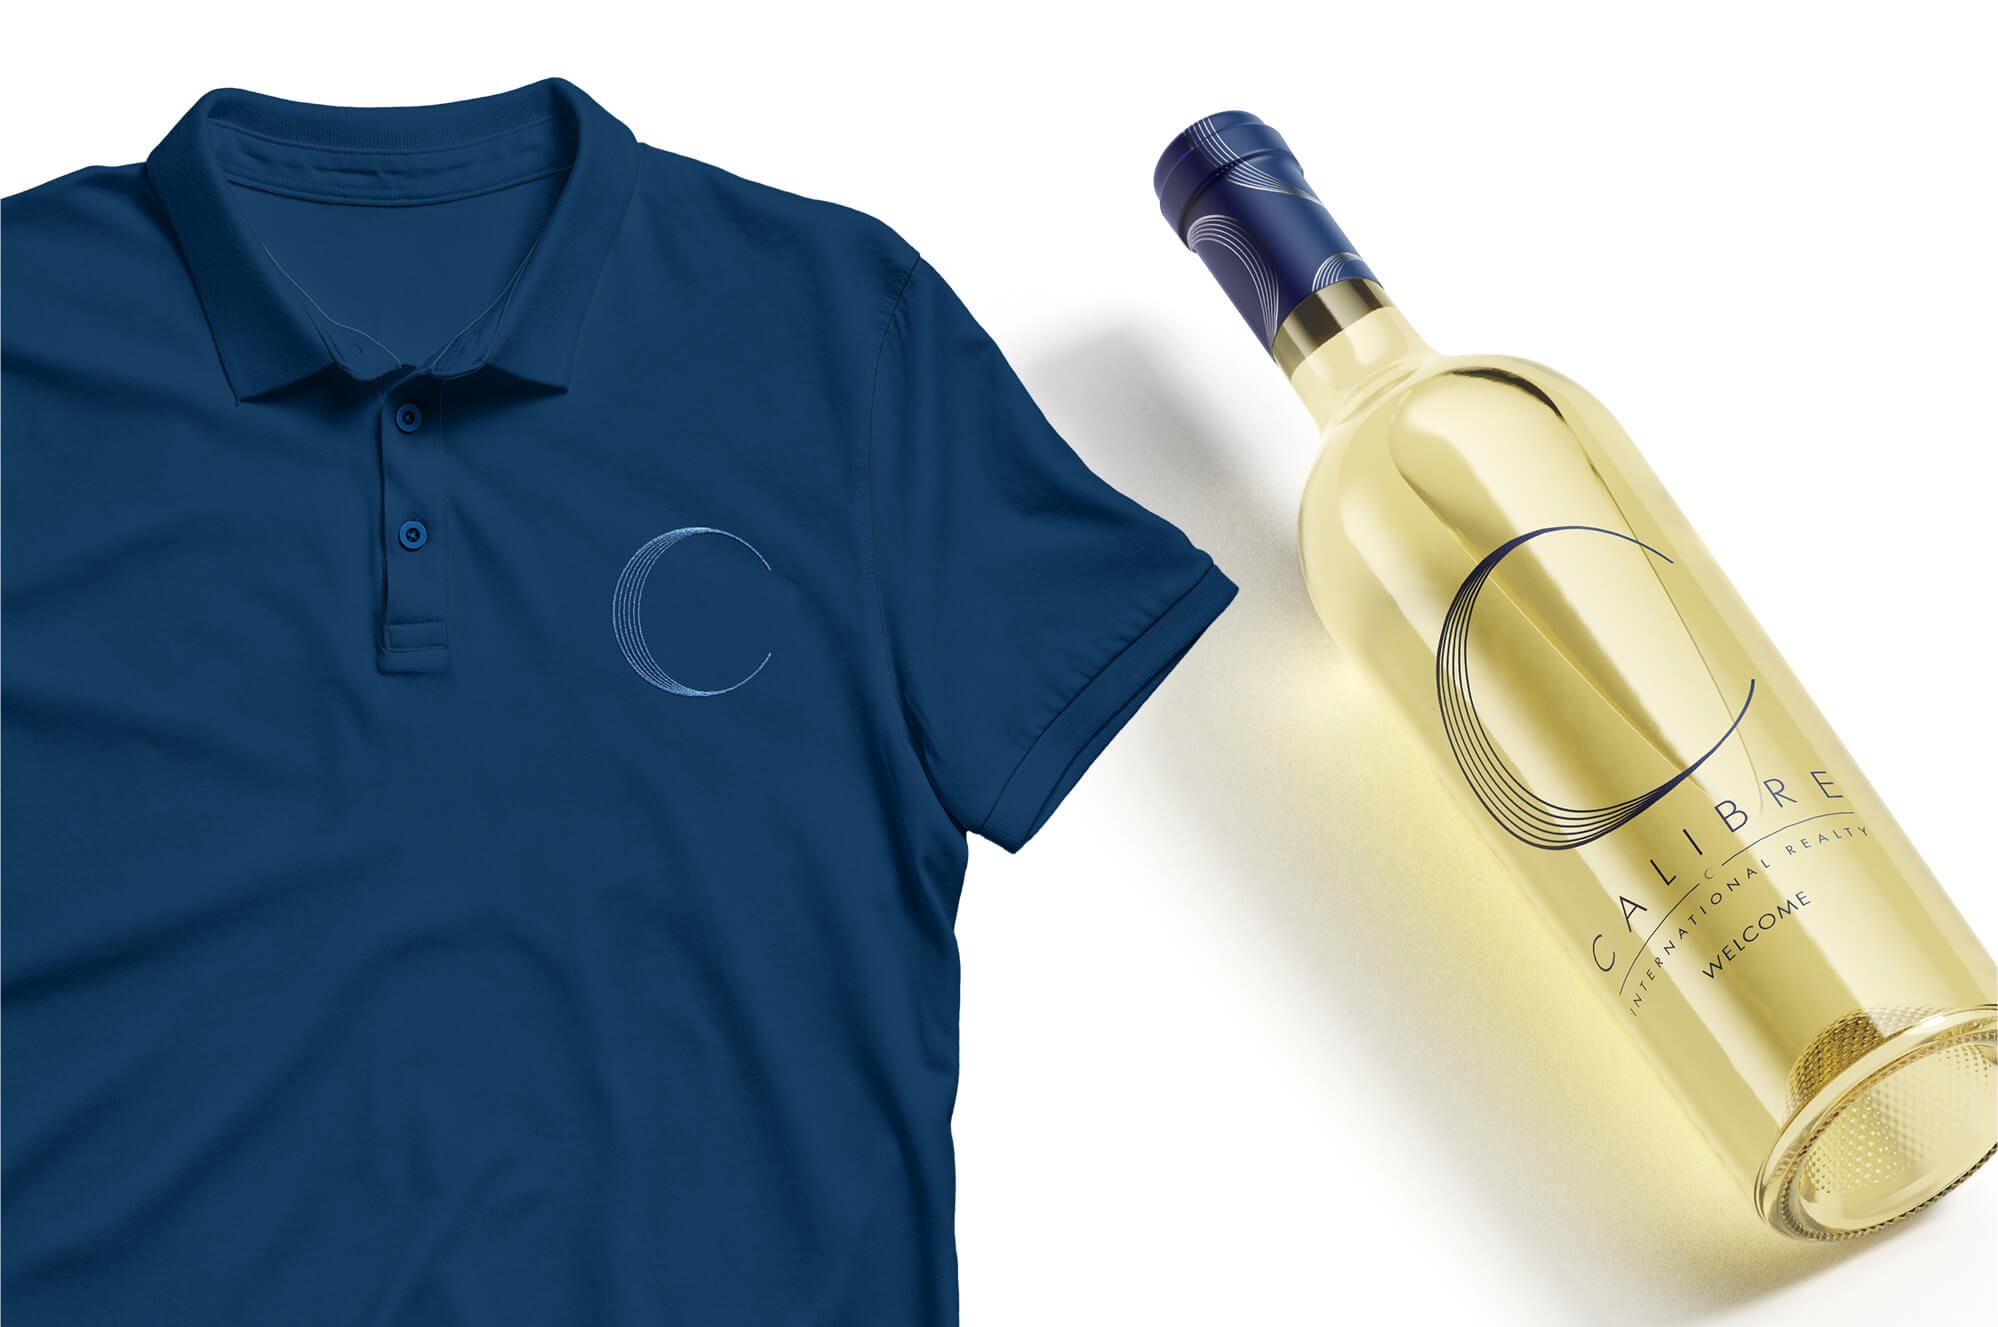 Jacober Creative Brand Identity for Calibre International Realty. Photo of branded polo and wine bottle